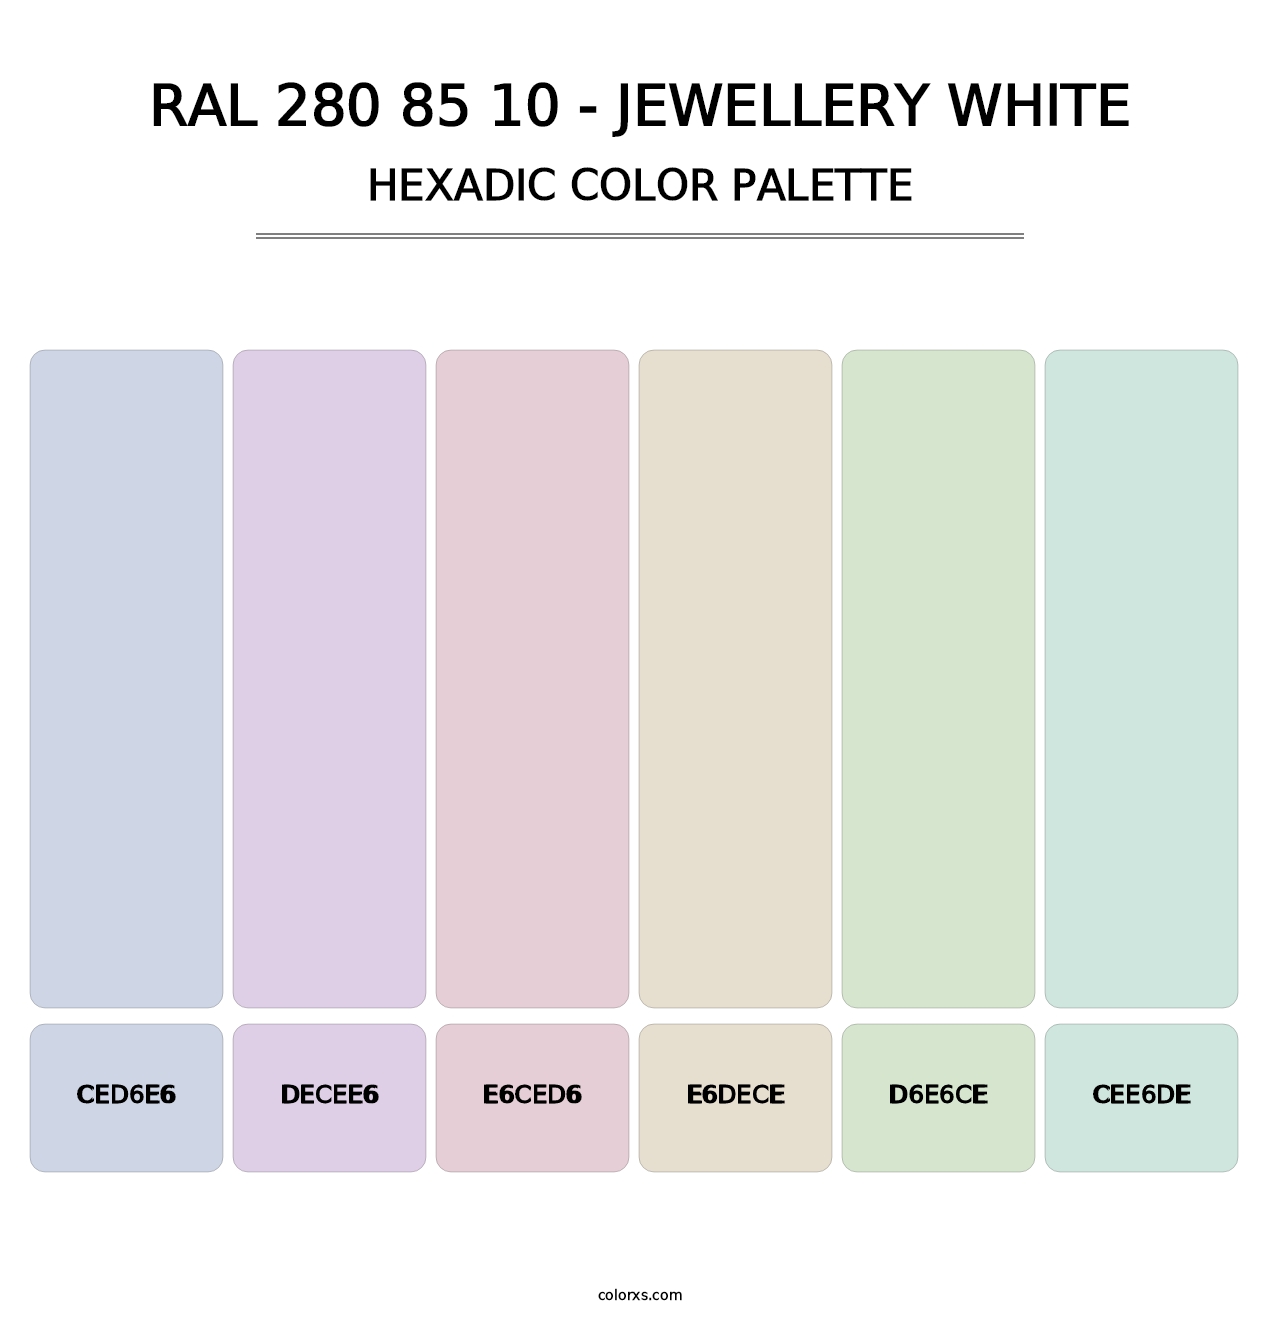 RAL 280 85 10 - Jewellery White - Hexadic Color Palette